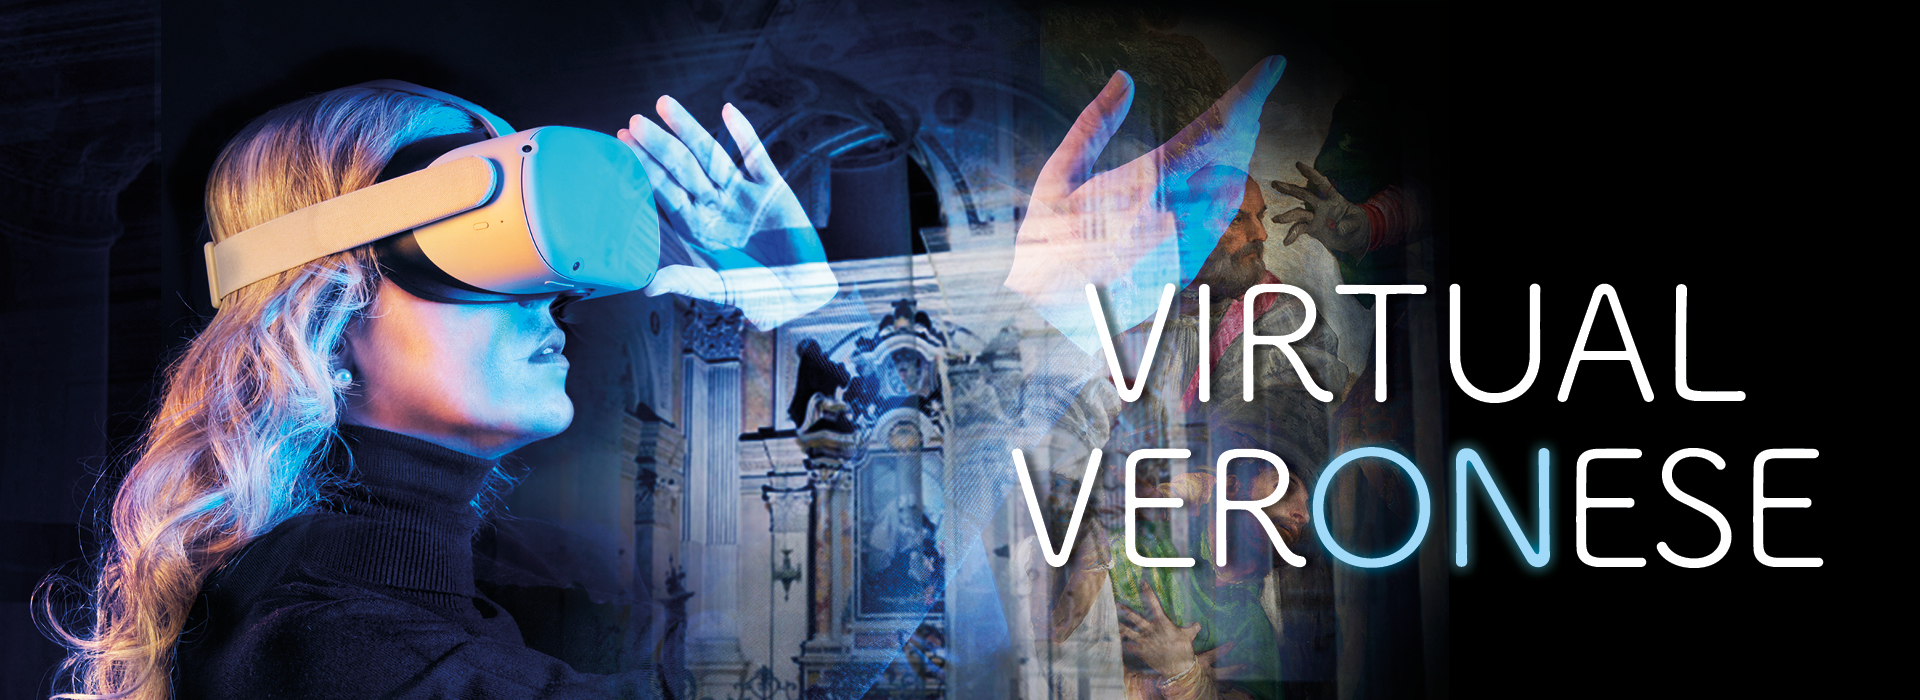 Virtual Veronese – XR Special Project